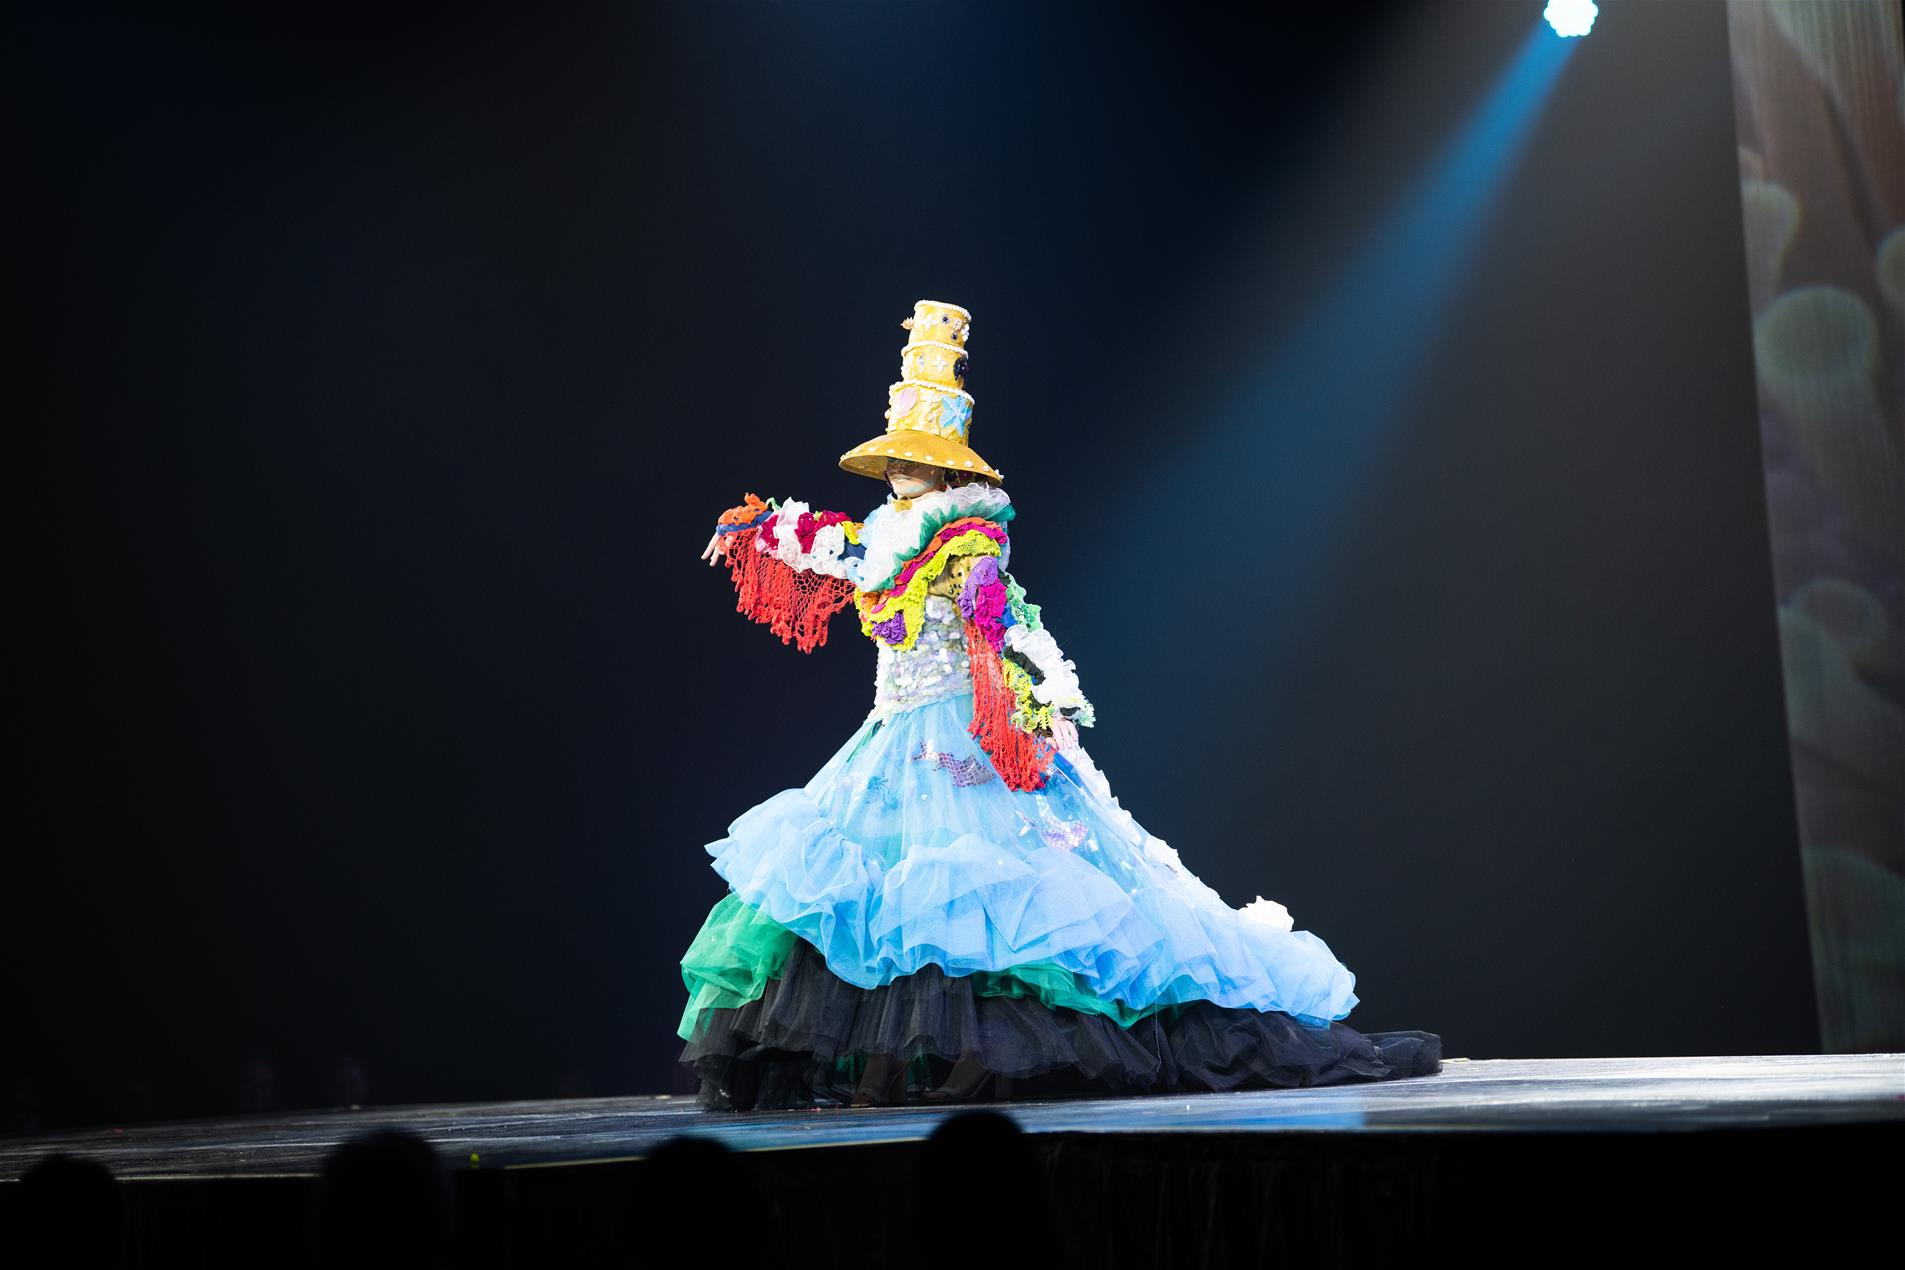 A woman in a colourful dress performing on stage.